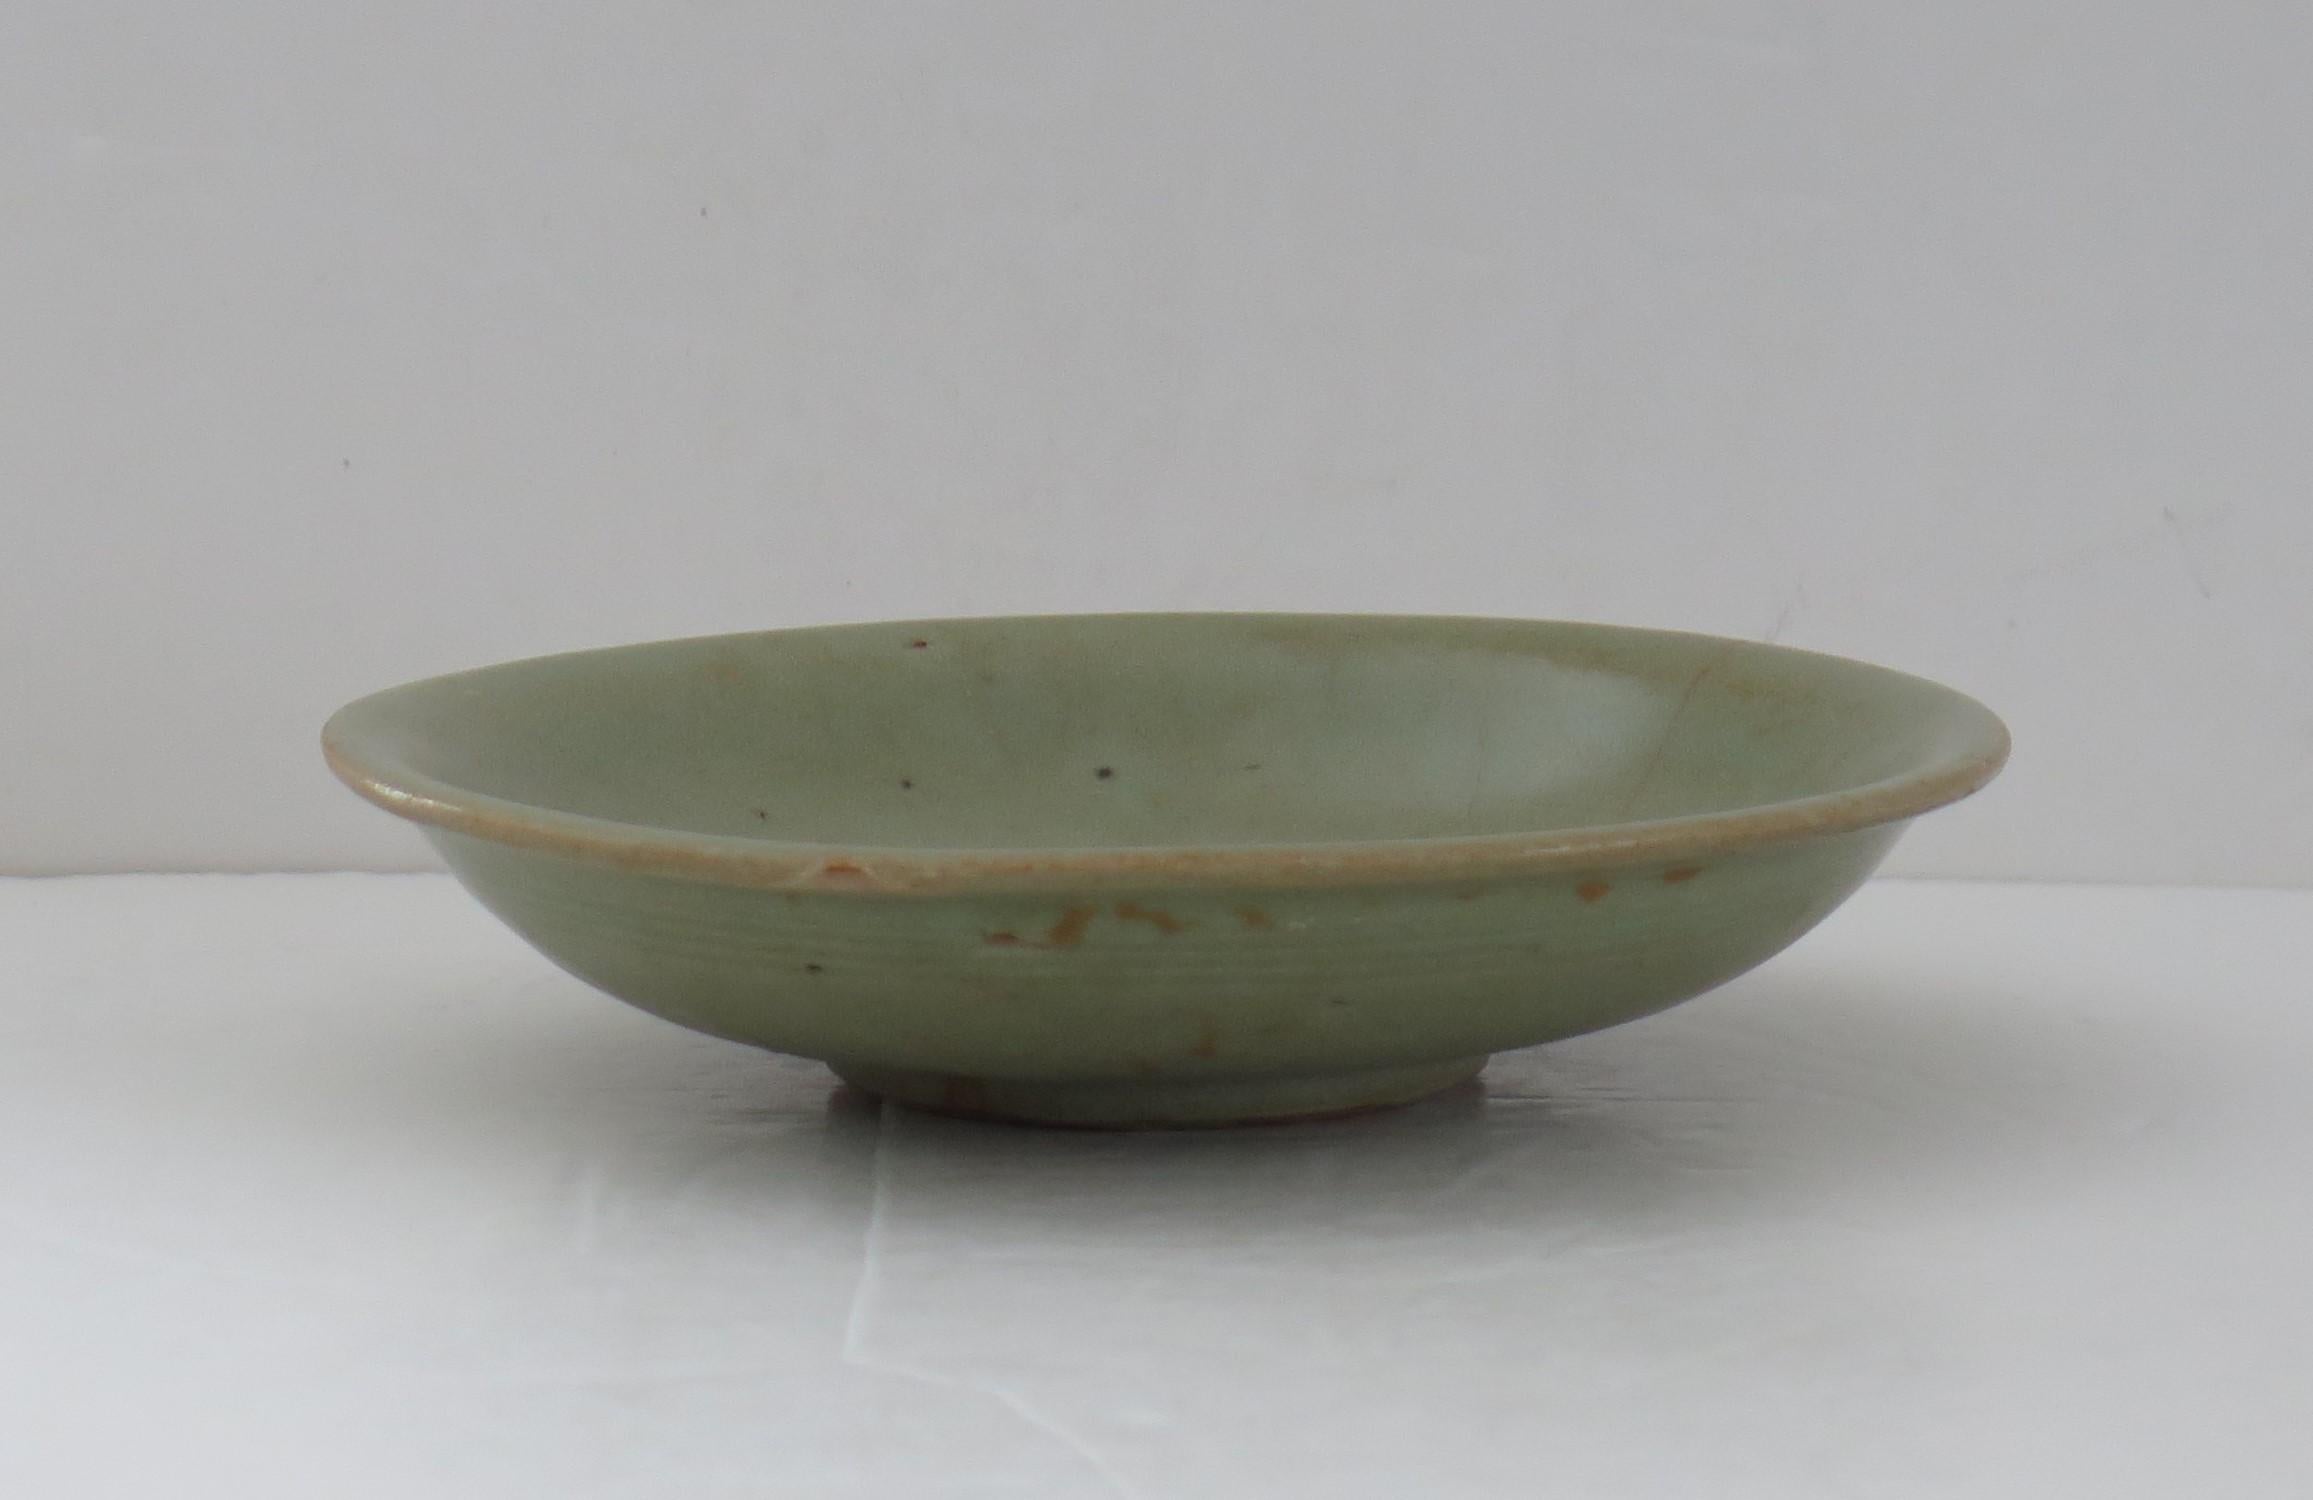 This is a very old interesting Chinese stoneware Longquan Celadon bowl or plate with incised decoration, which we date to the Yuan Dynasty, circa 1300.

The bowl is well potted on a low foot. 

The bowl is an olive green colour having a celadon